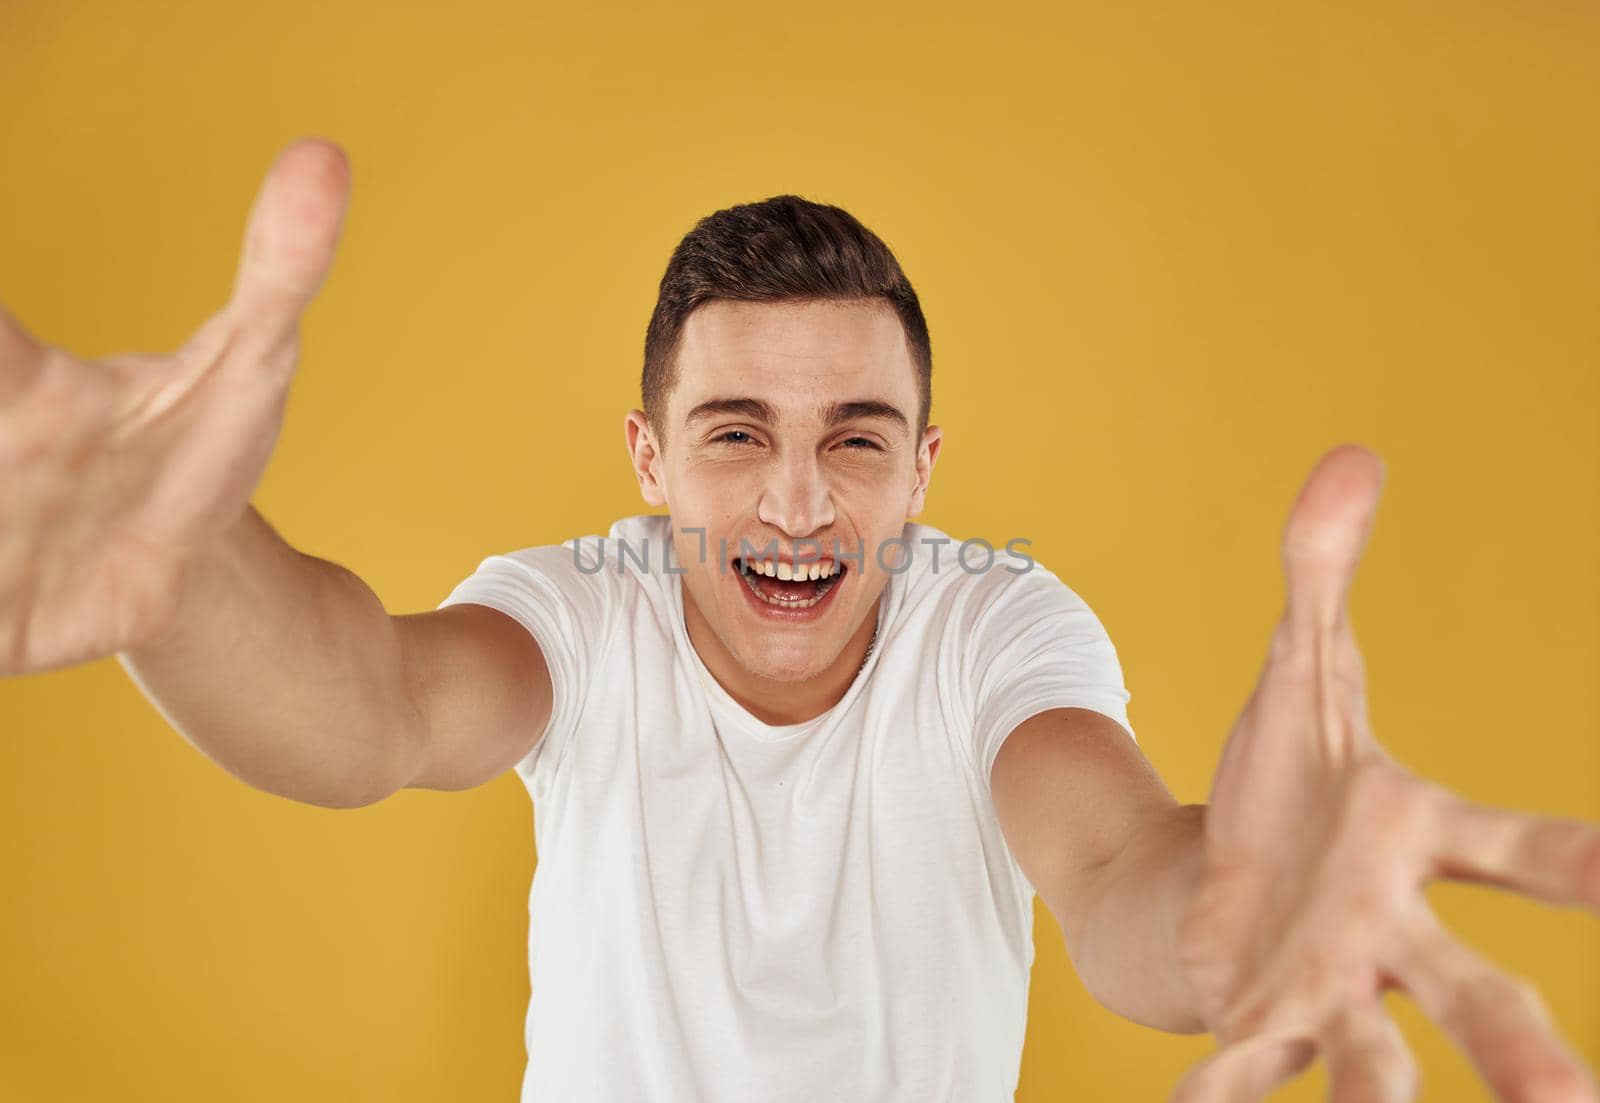 Happy guy on a yellow background gestures with his hands portrait model cropped view. High quality photo